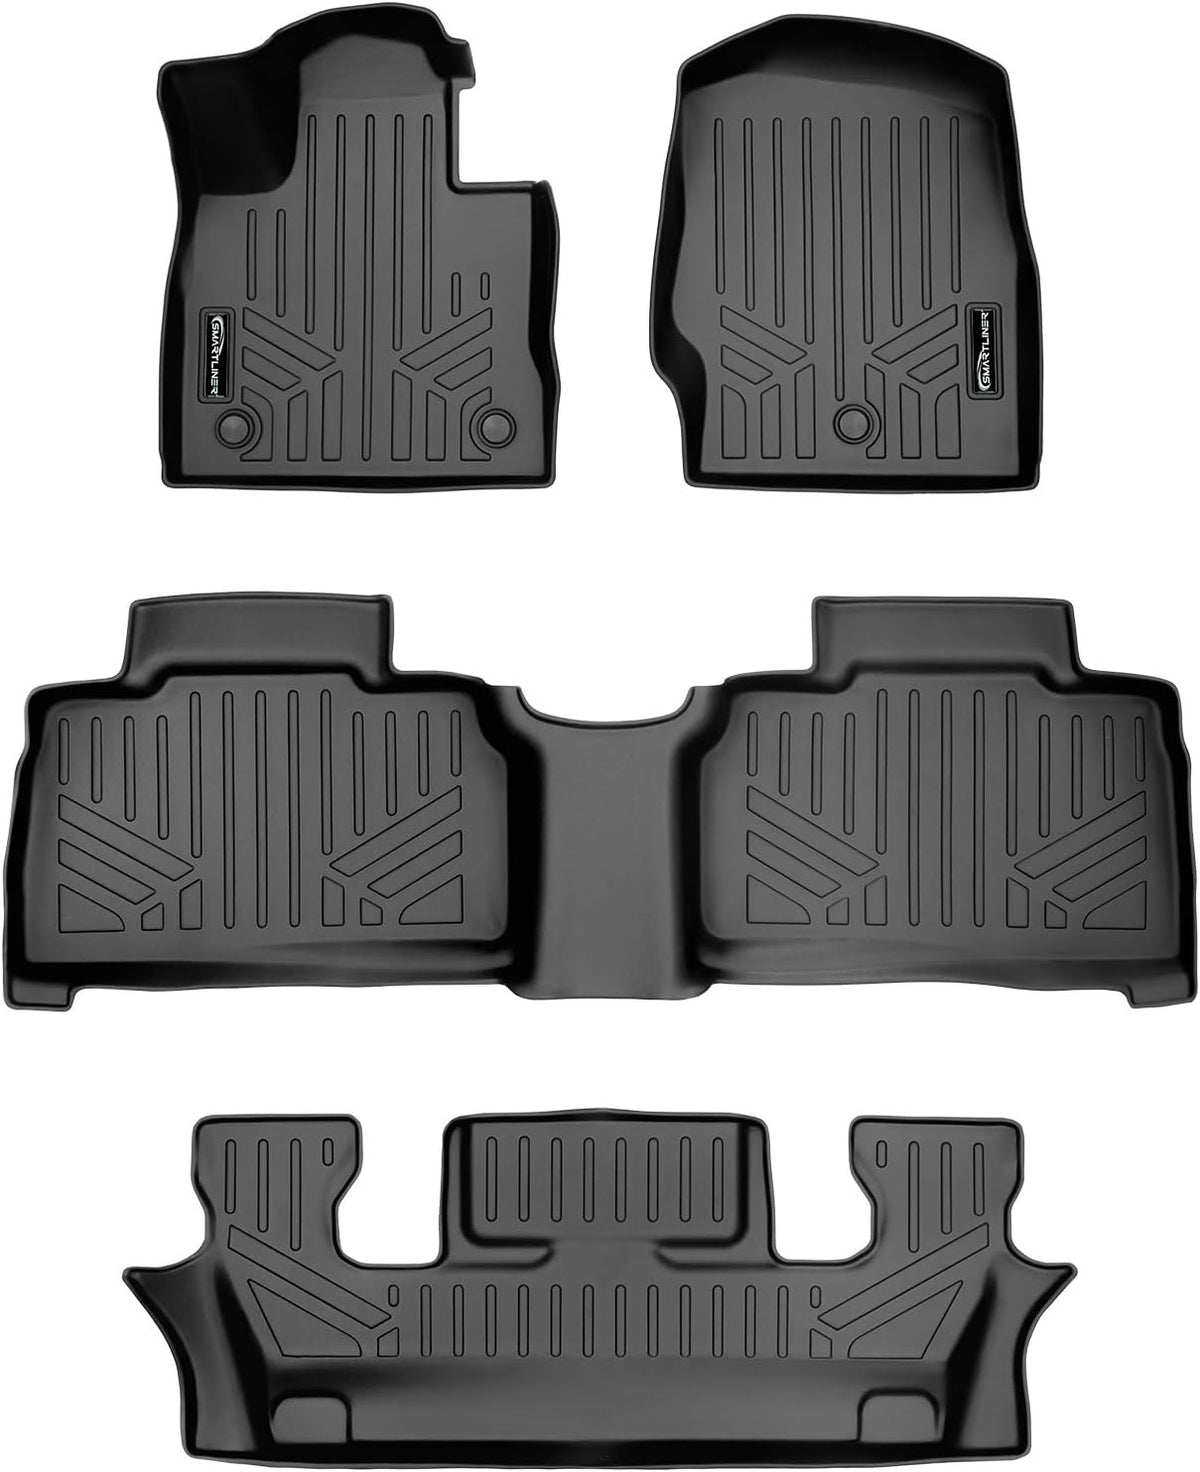 SMARTLINER Custom Floor Mats 3 Row Liner Set Black Compatible with 2020-2023 Compatible with Ford Explorer Only Fits 6 Passenger Models W/ 2nd Row Bucket Seat